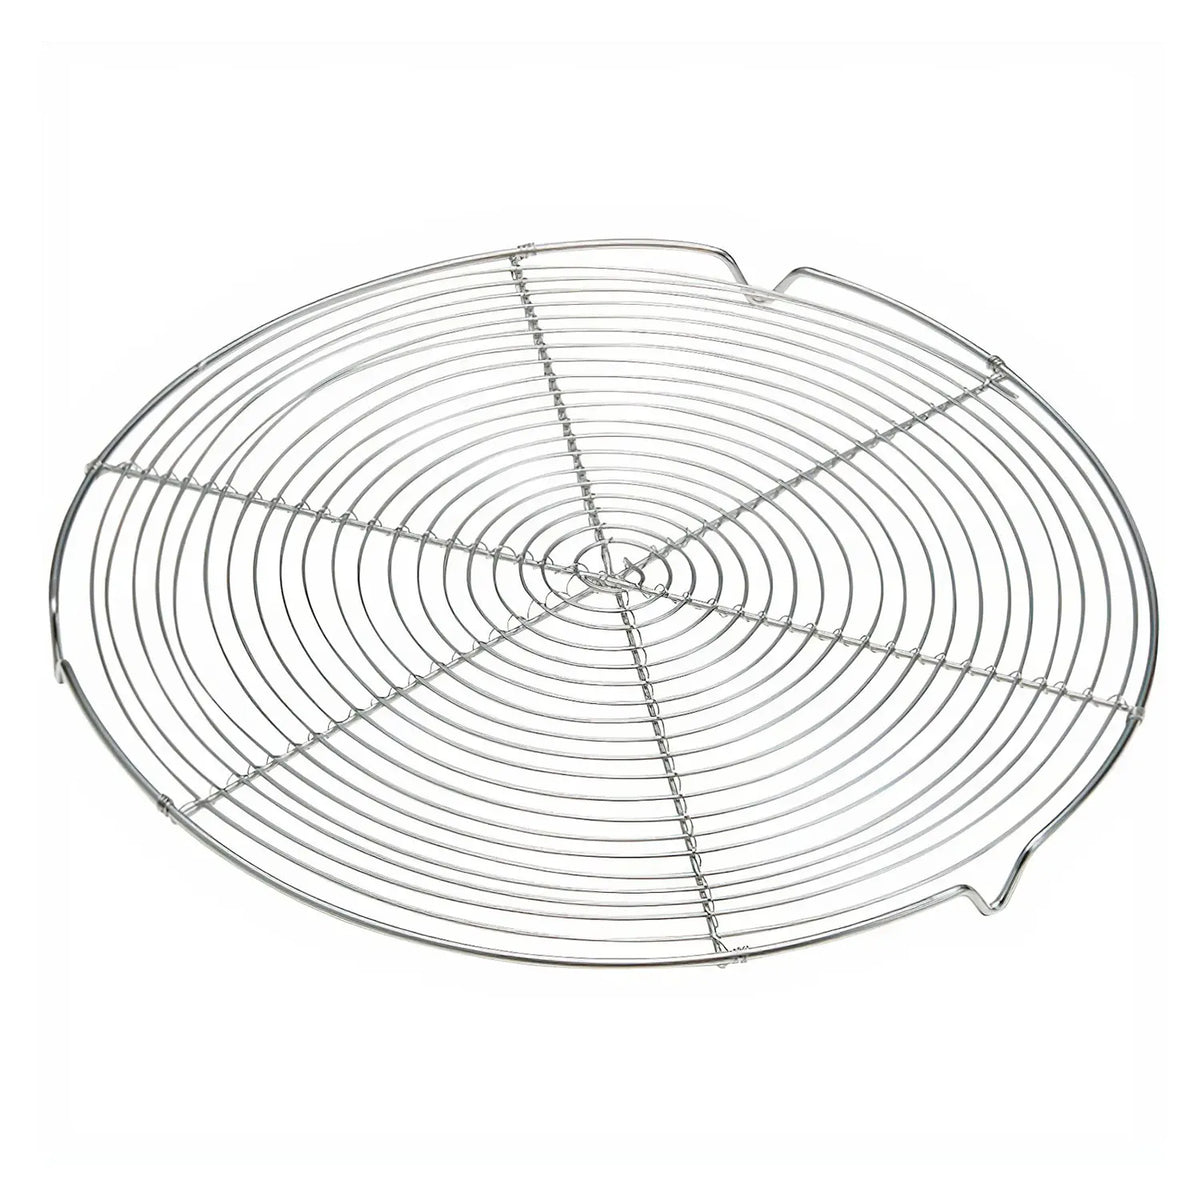 TIGERCROWN Cake Land Stainless Steel Round Cake Cooling Rack with Feet